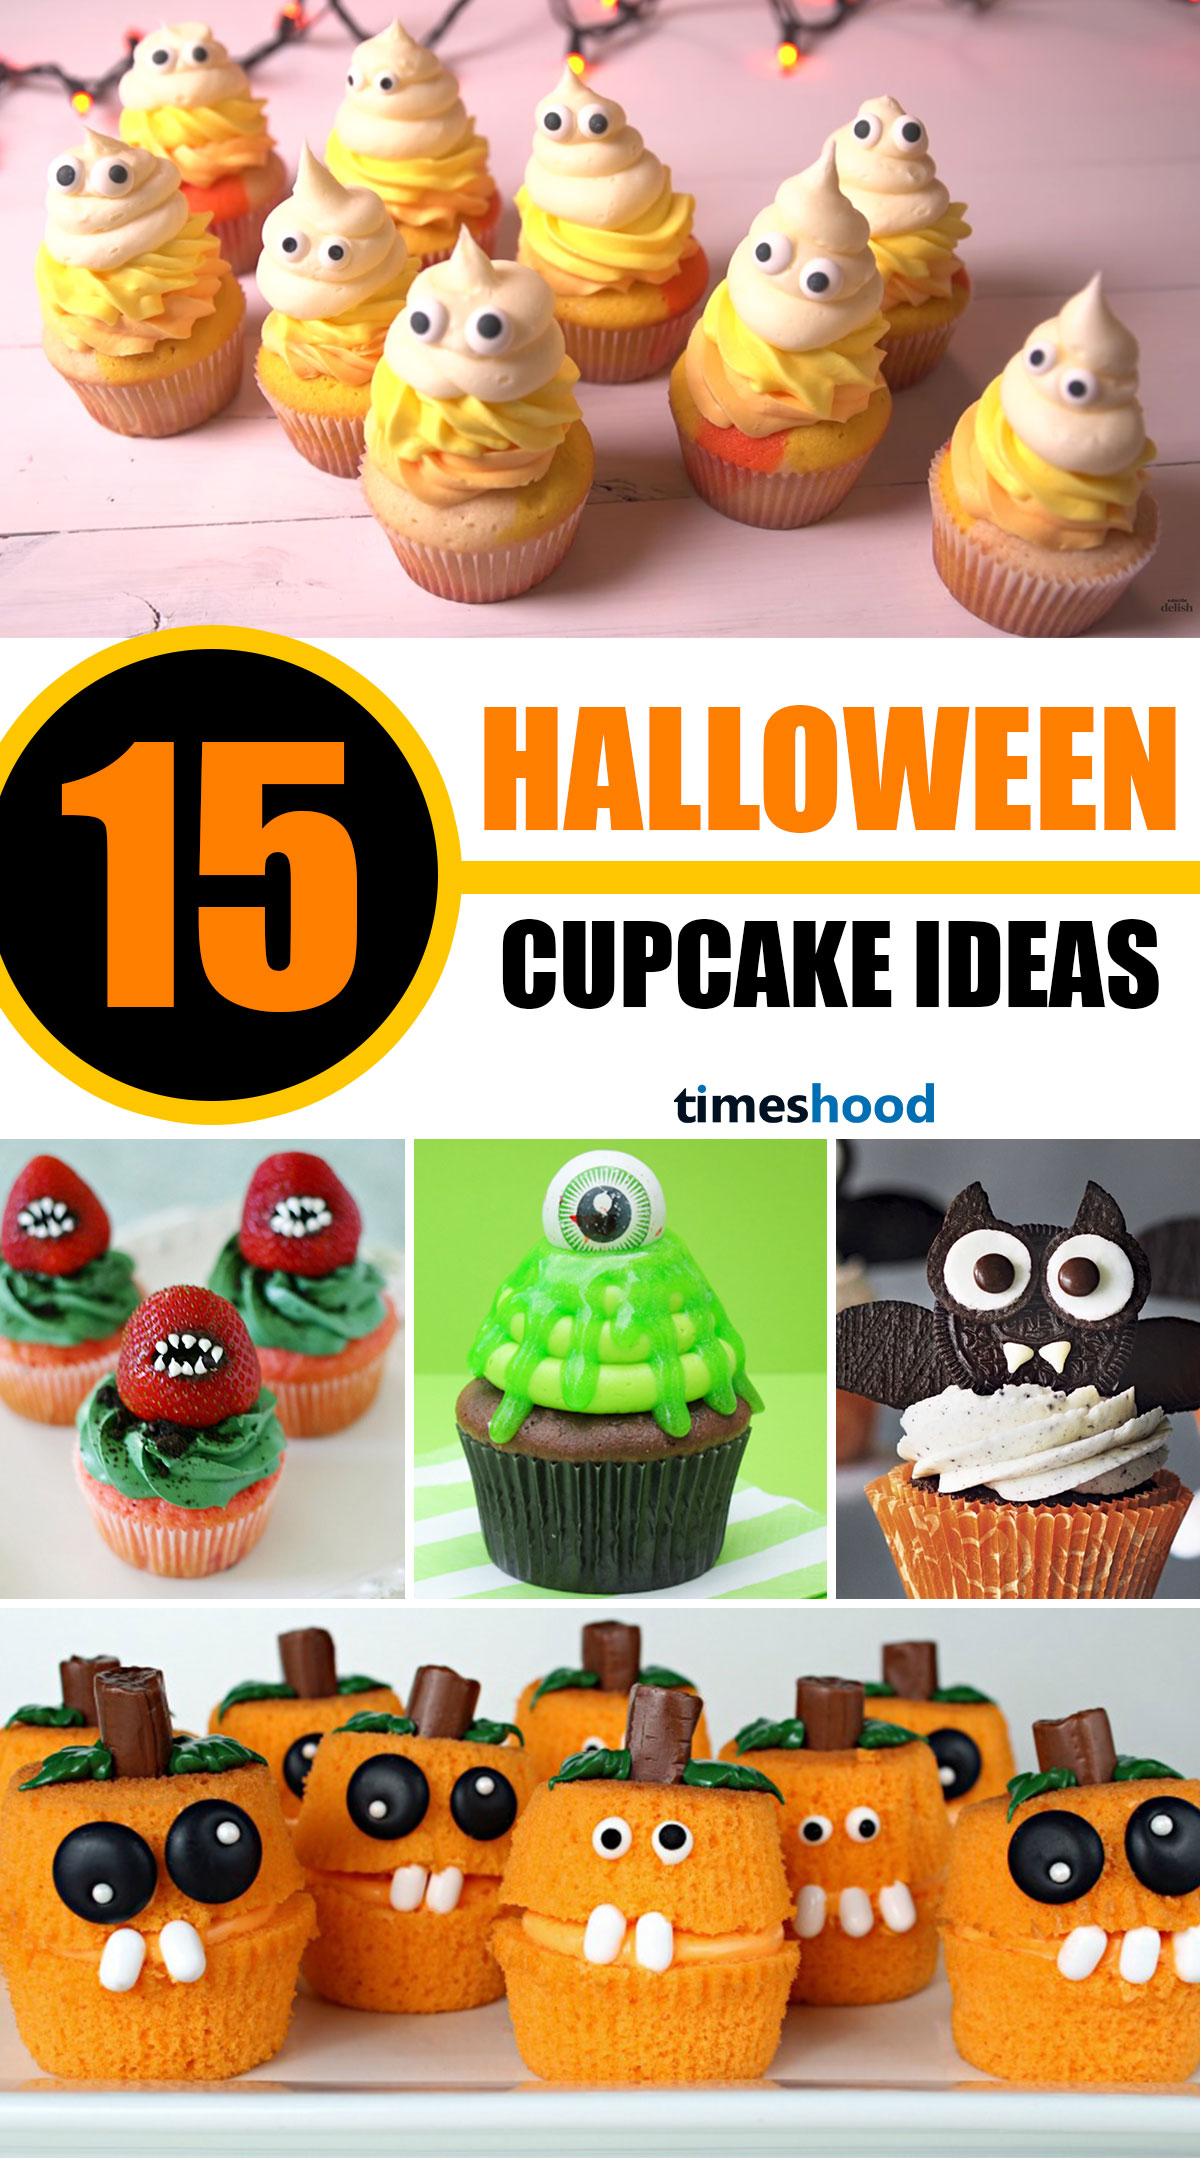 15 Amazing Halloween Cupcake Ideas. A Perfect & Adorable Cupcakes for any Halloween themed occasion! Easy, Fun, and Spooky Halloween cupcakes recipes. Amazing Halloween Cupcake Recipes Ideas.